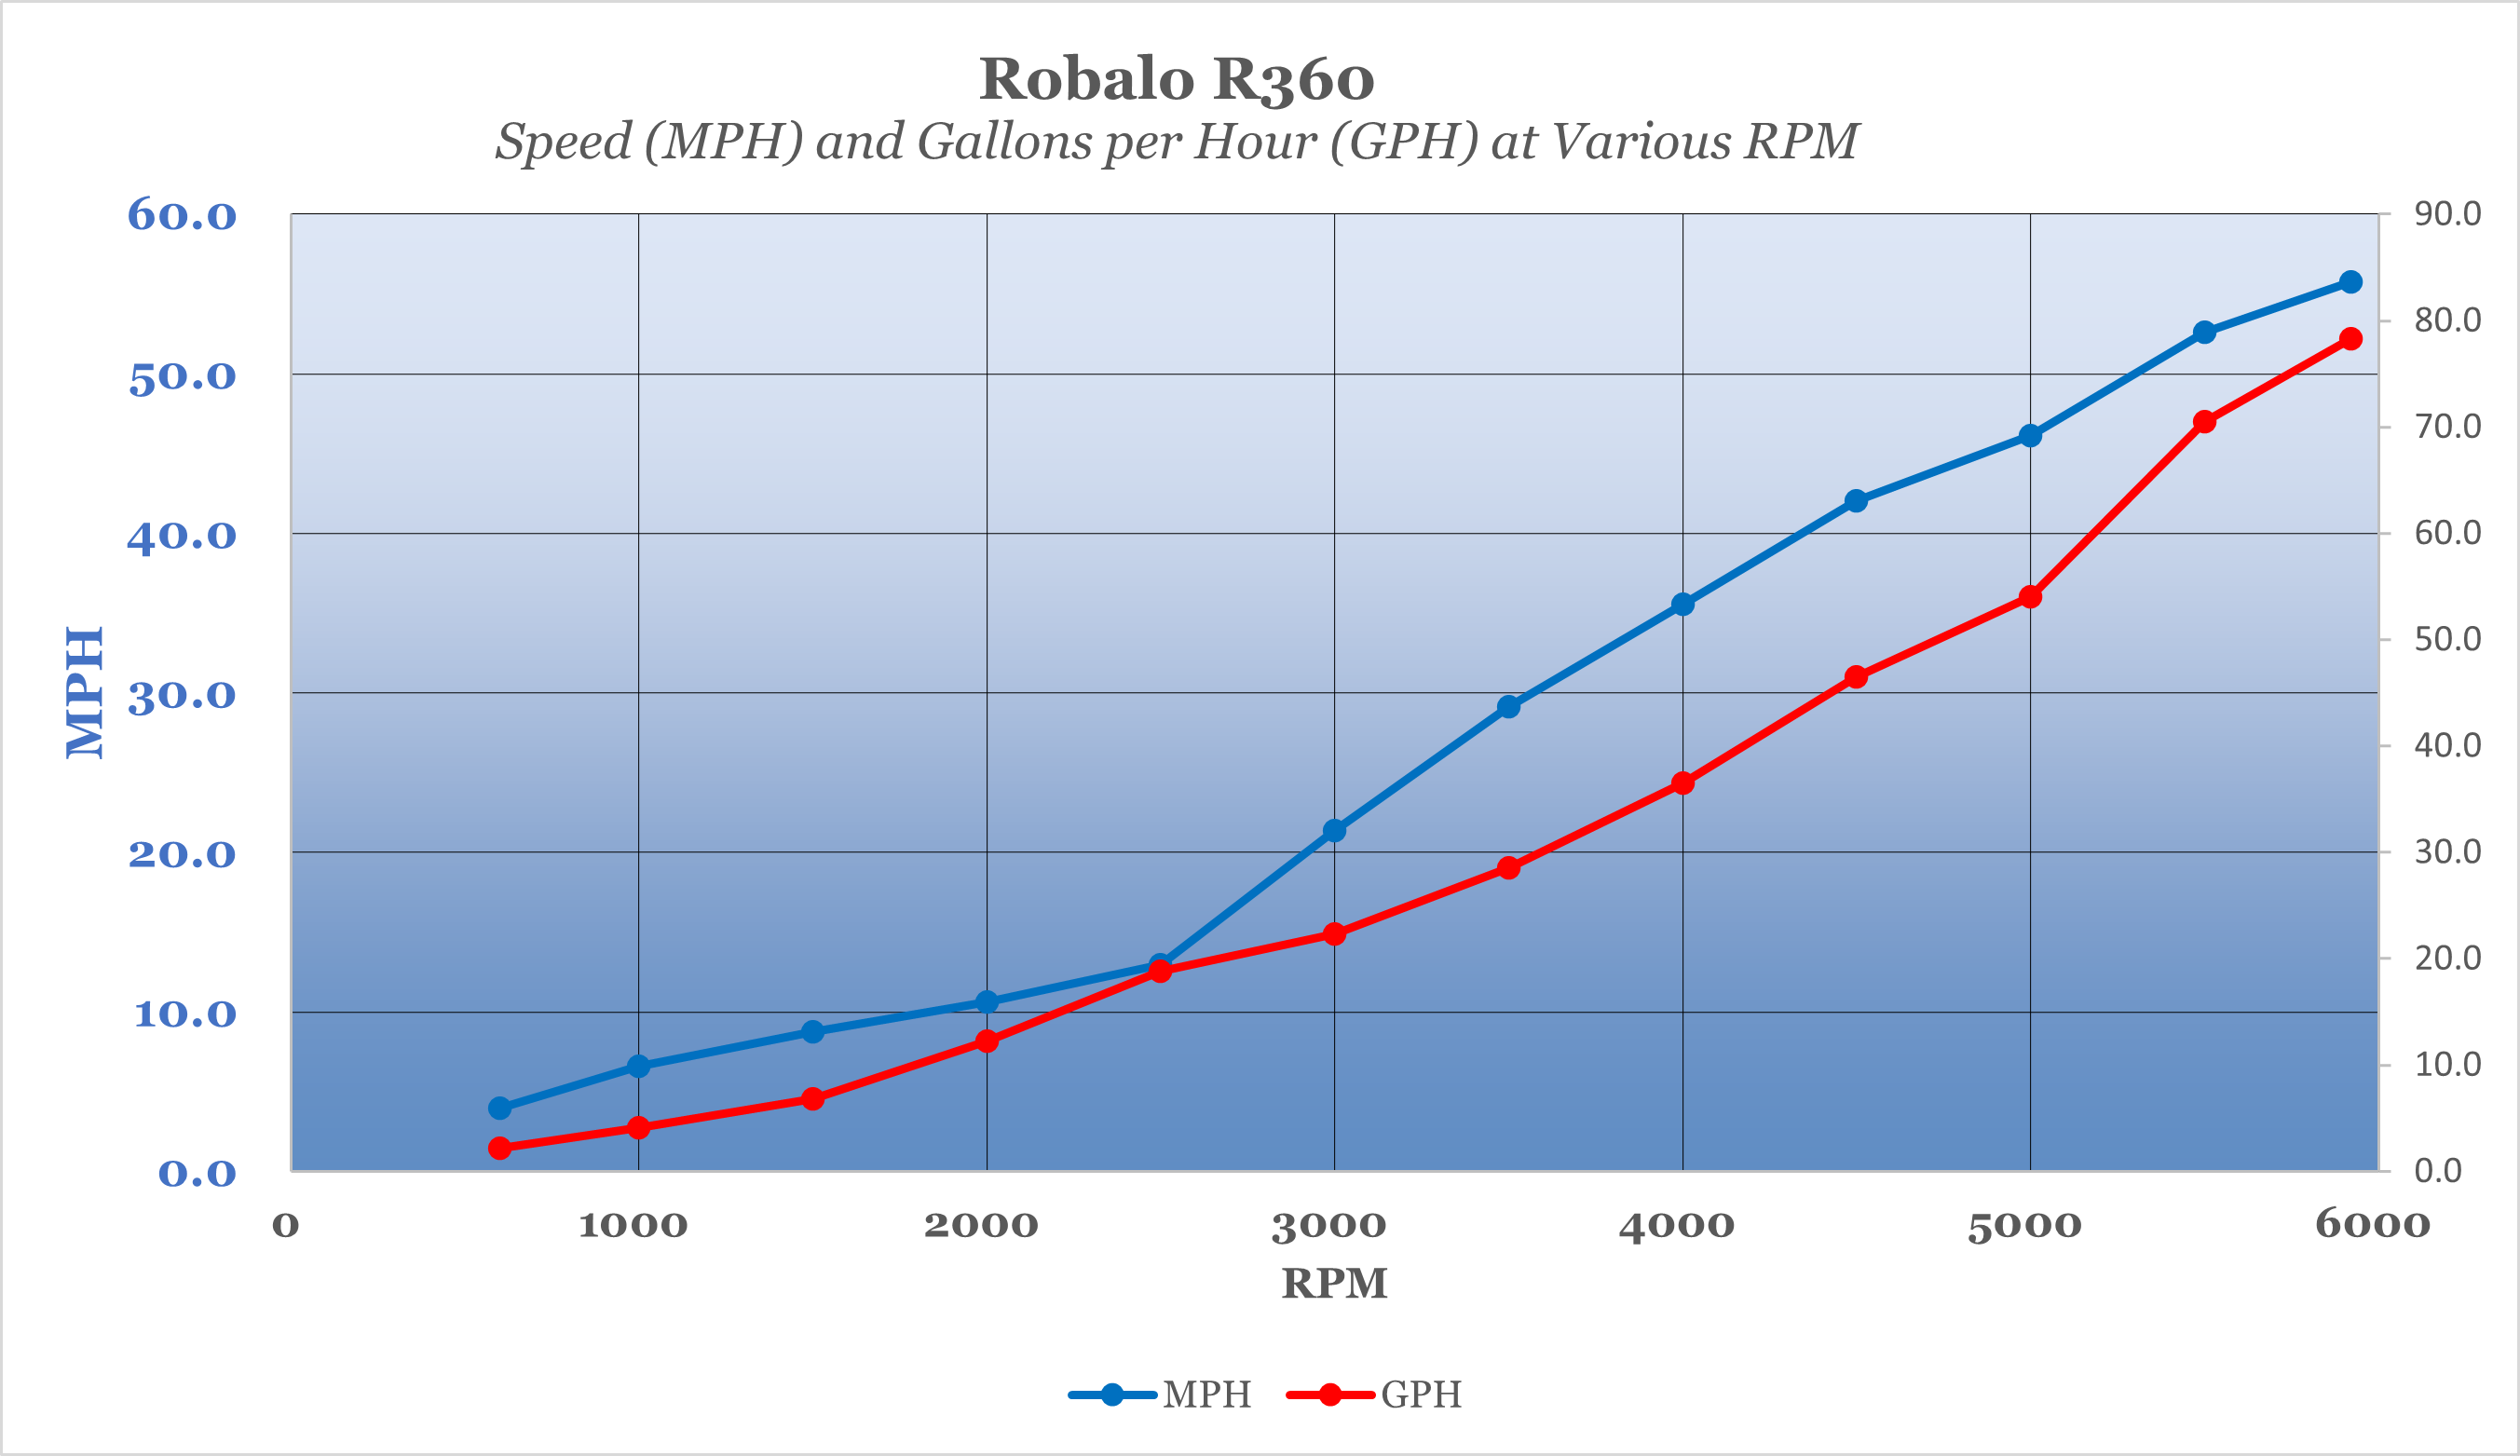 Robalo R360 speed (mph) and gallons per hour (gph) performance chart